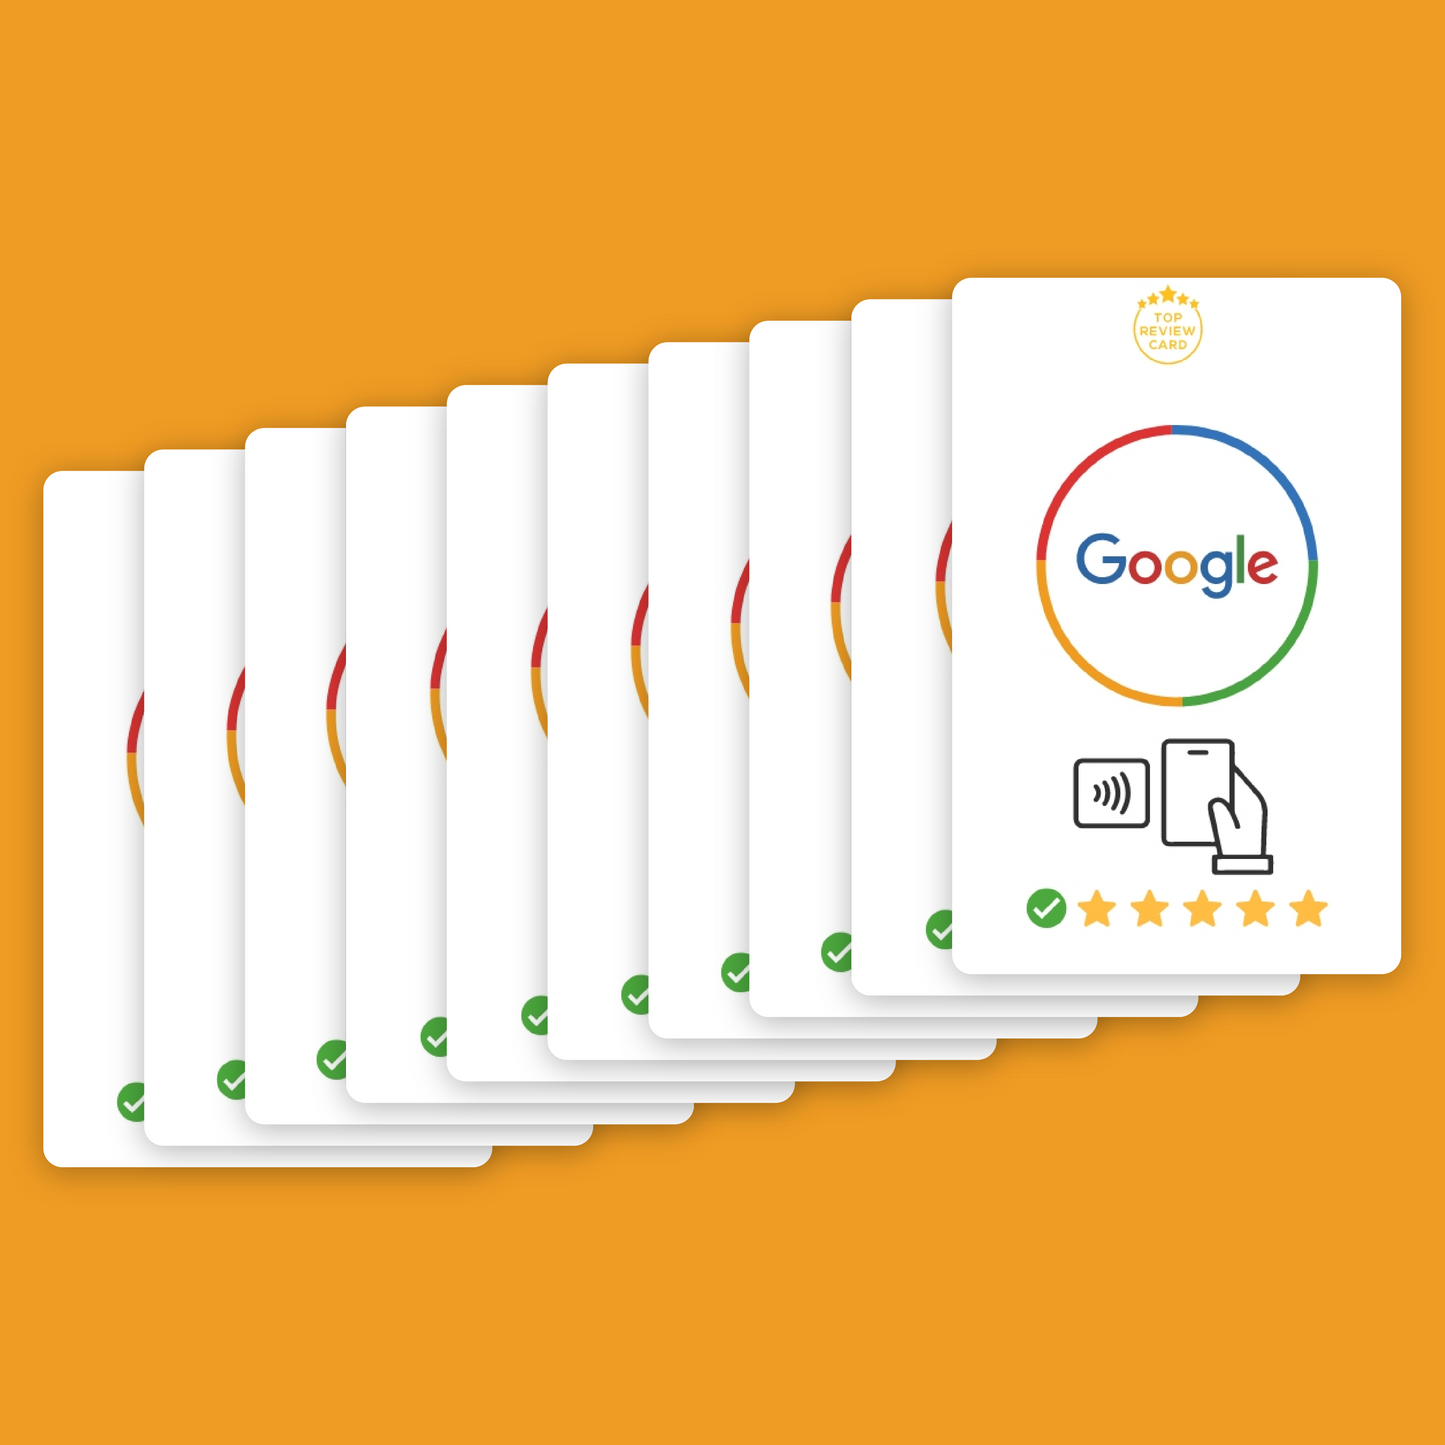 Inspire Confidence, Drive Conversions Inspire confidence in potential customers and drive conversions with our Google Review Cards. Let your stellar reviews do the talking and watch as sales soar.